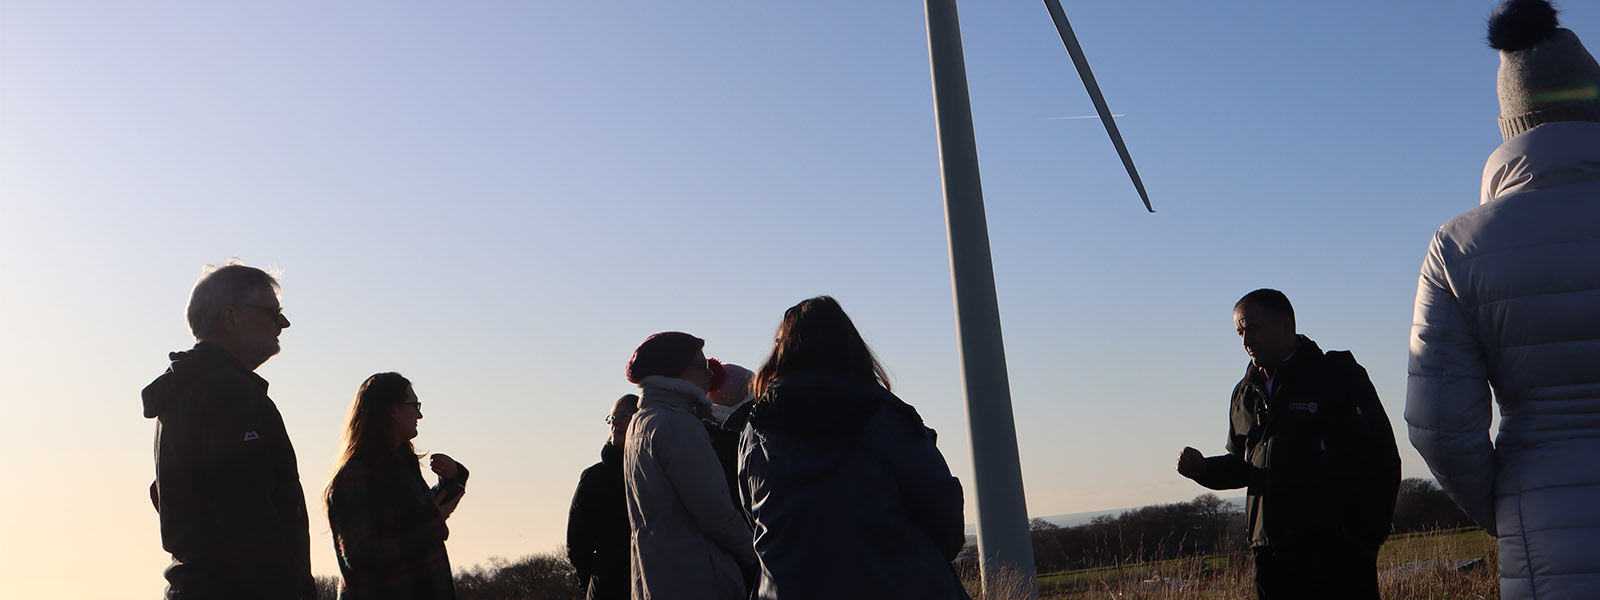 Lancaster University's wind turbine with people attending a talk on sustainability.